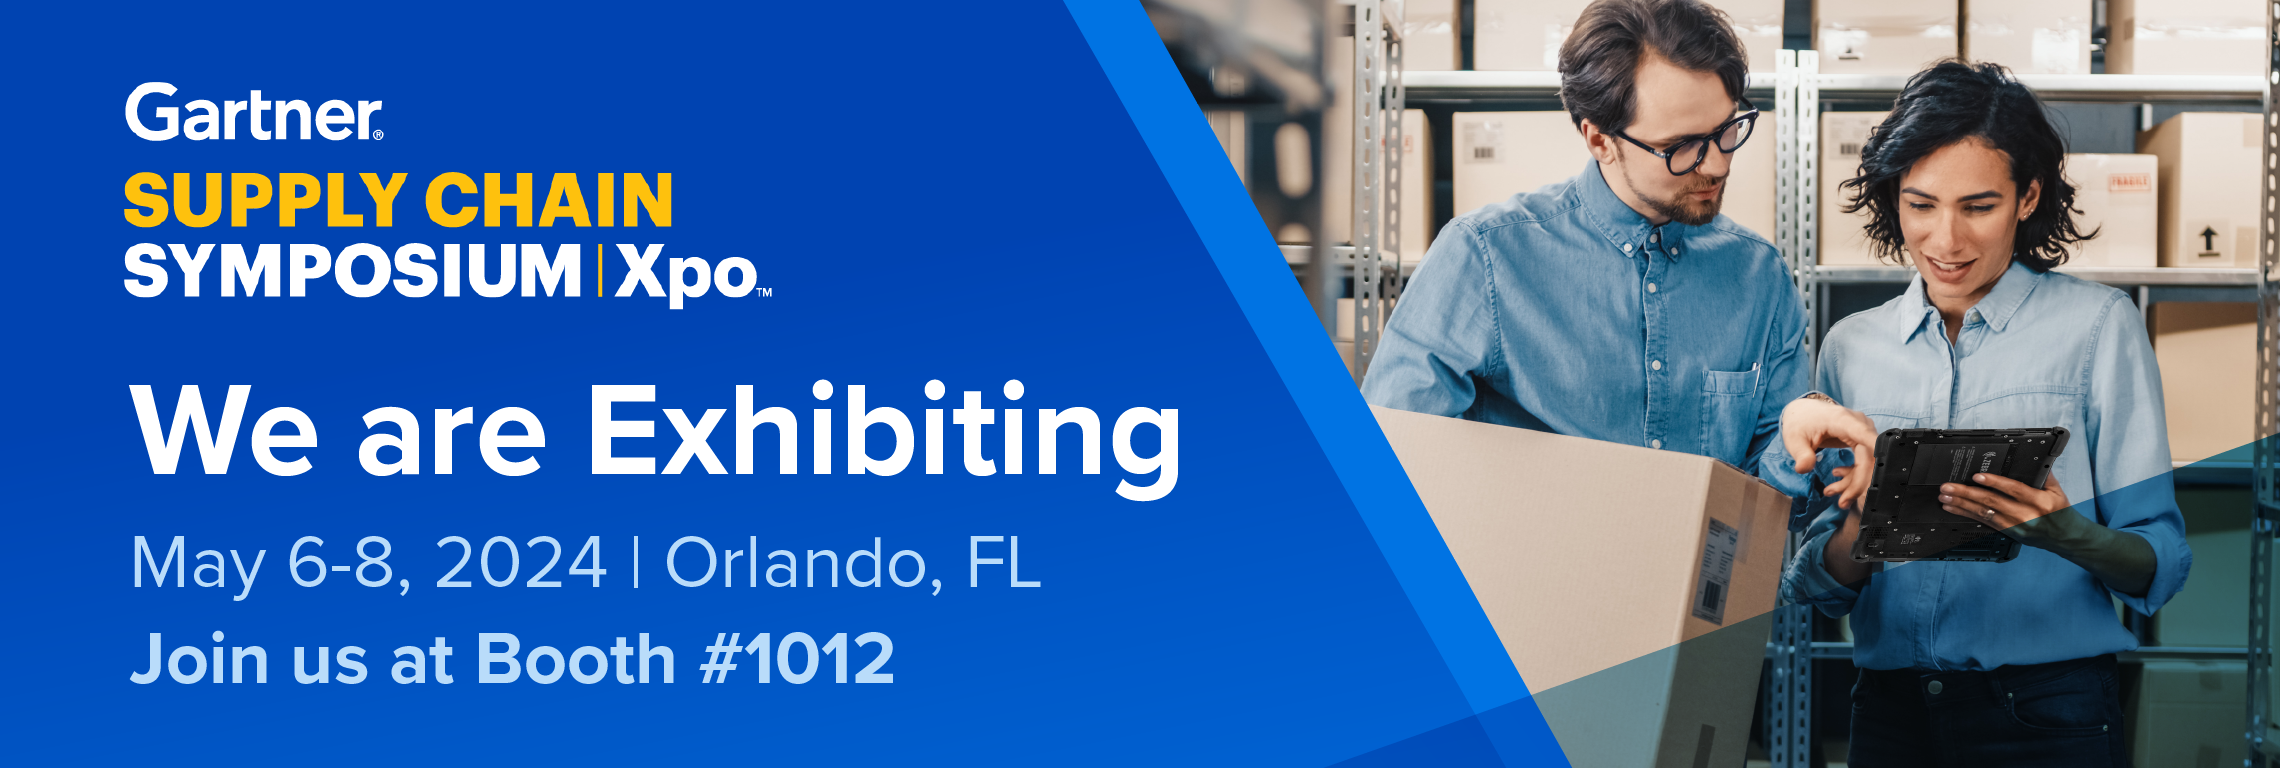 Unlock Your Supply Chain Potential at Gartner Supply Chain Symposium Xpo™ 2024 with Zebra Technologies!